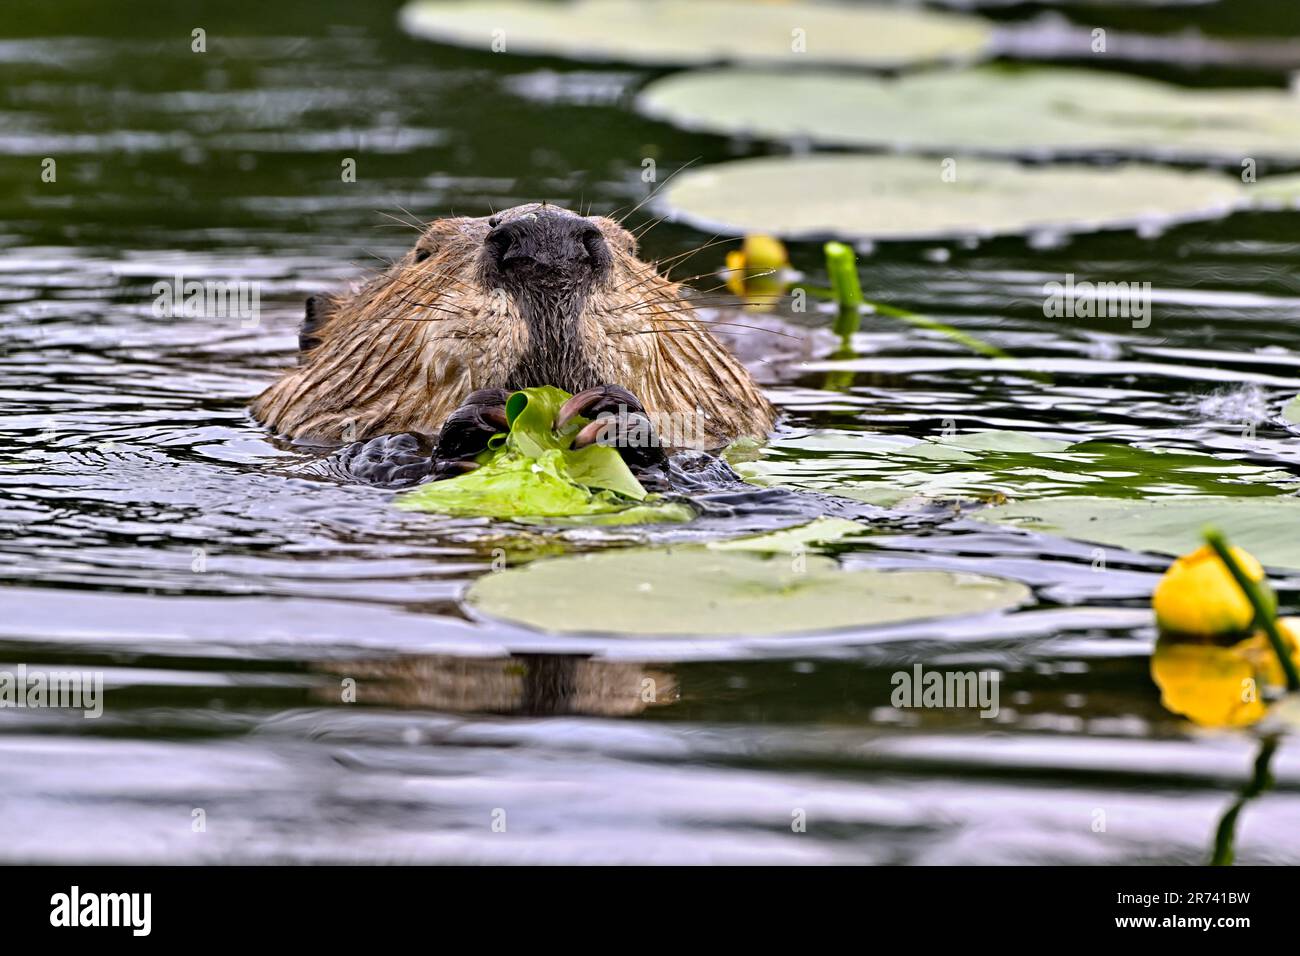 An adult beaver 'Castor canadensis', feeding on the lily pad water plants in a lake in rural Alberta Canada Stock Photo